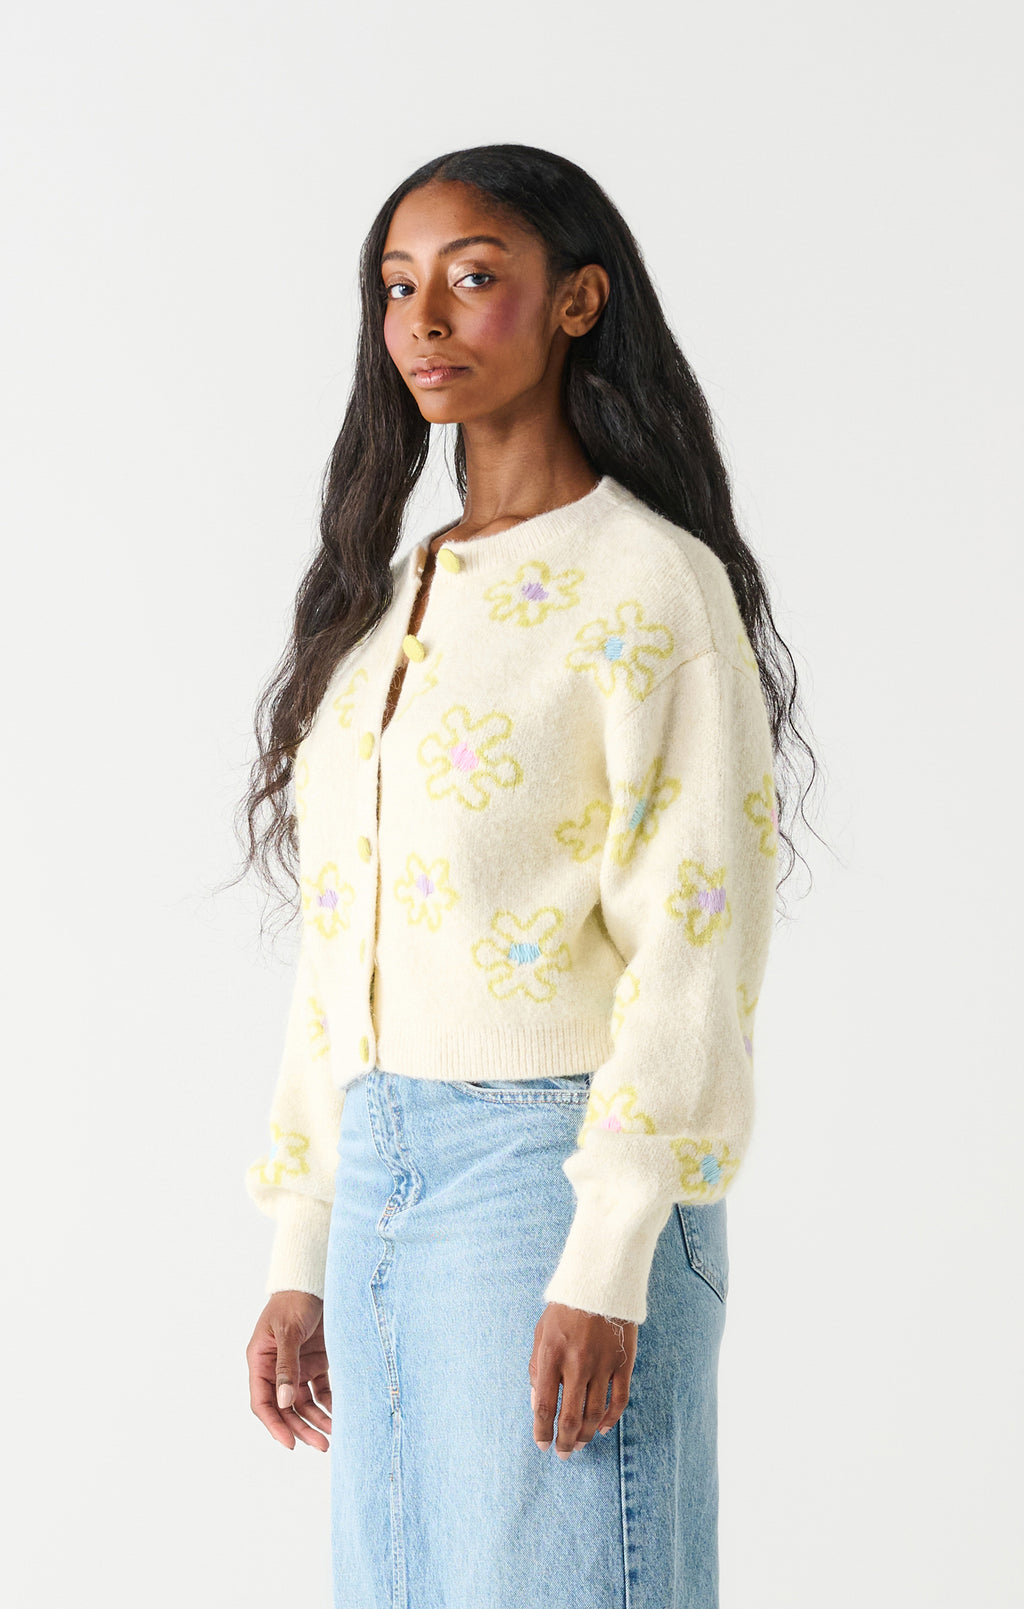 Dex Floral Embroidered Cardigan